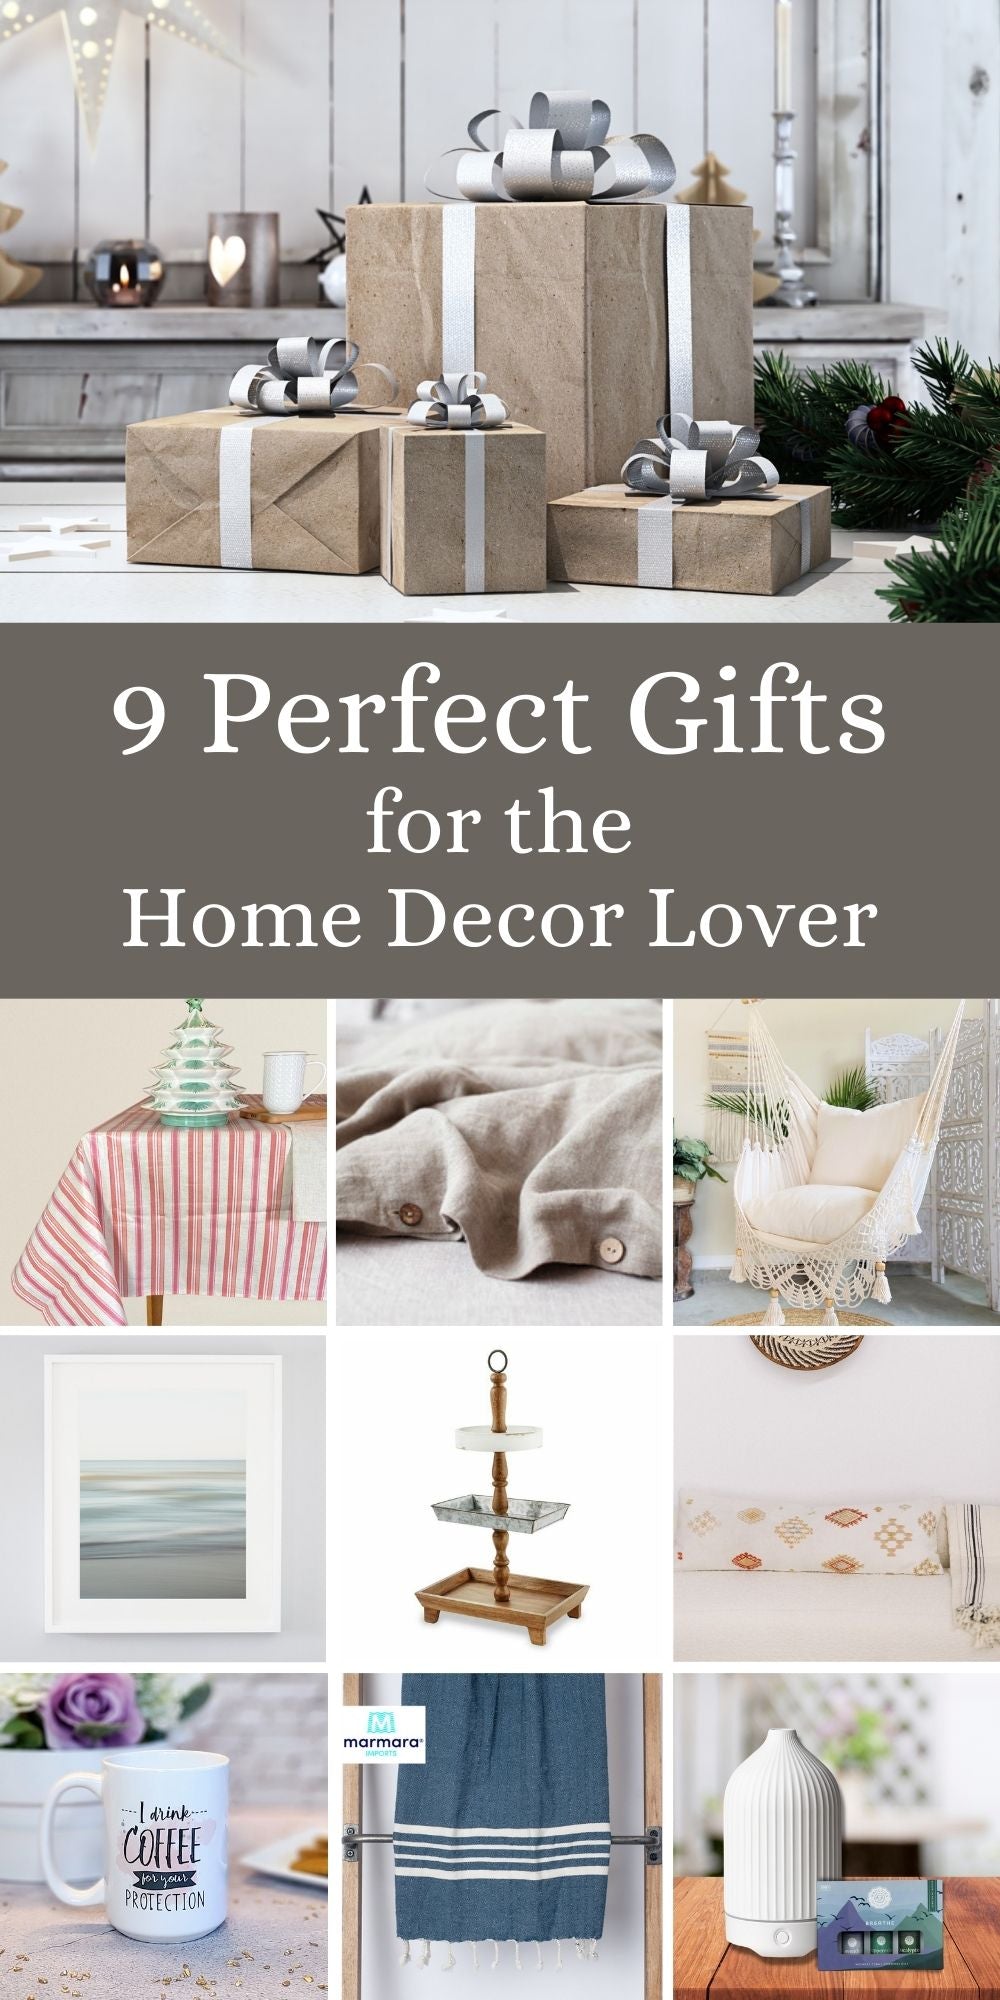 9 Incredible Perfect Gifts for the Home Decor Lover